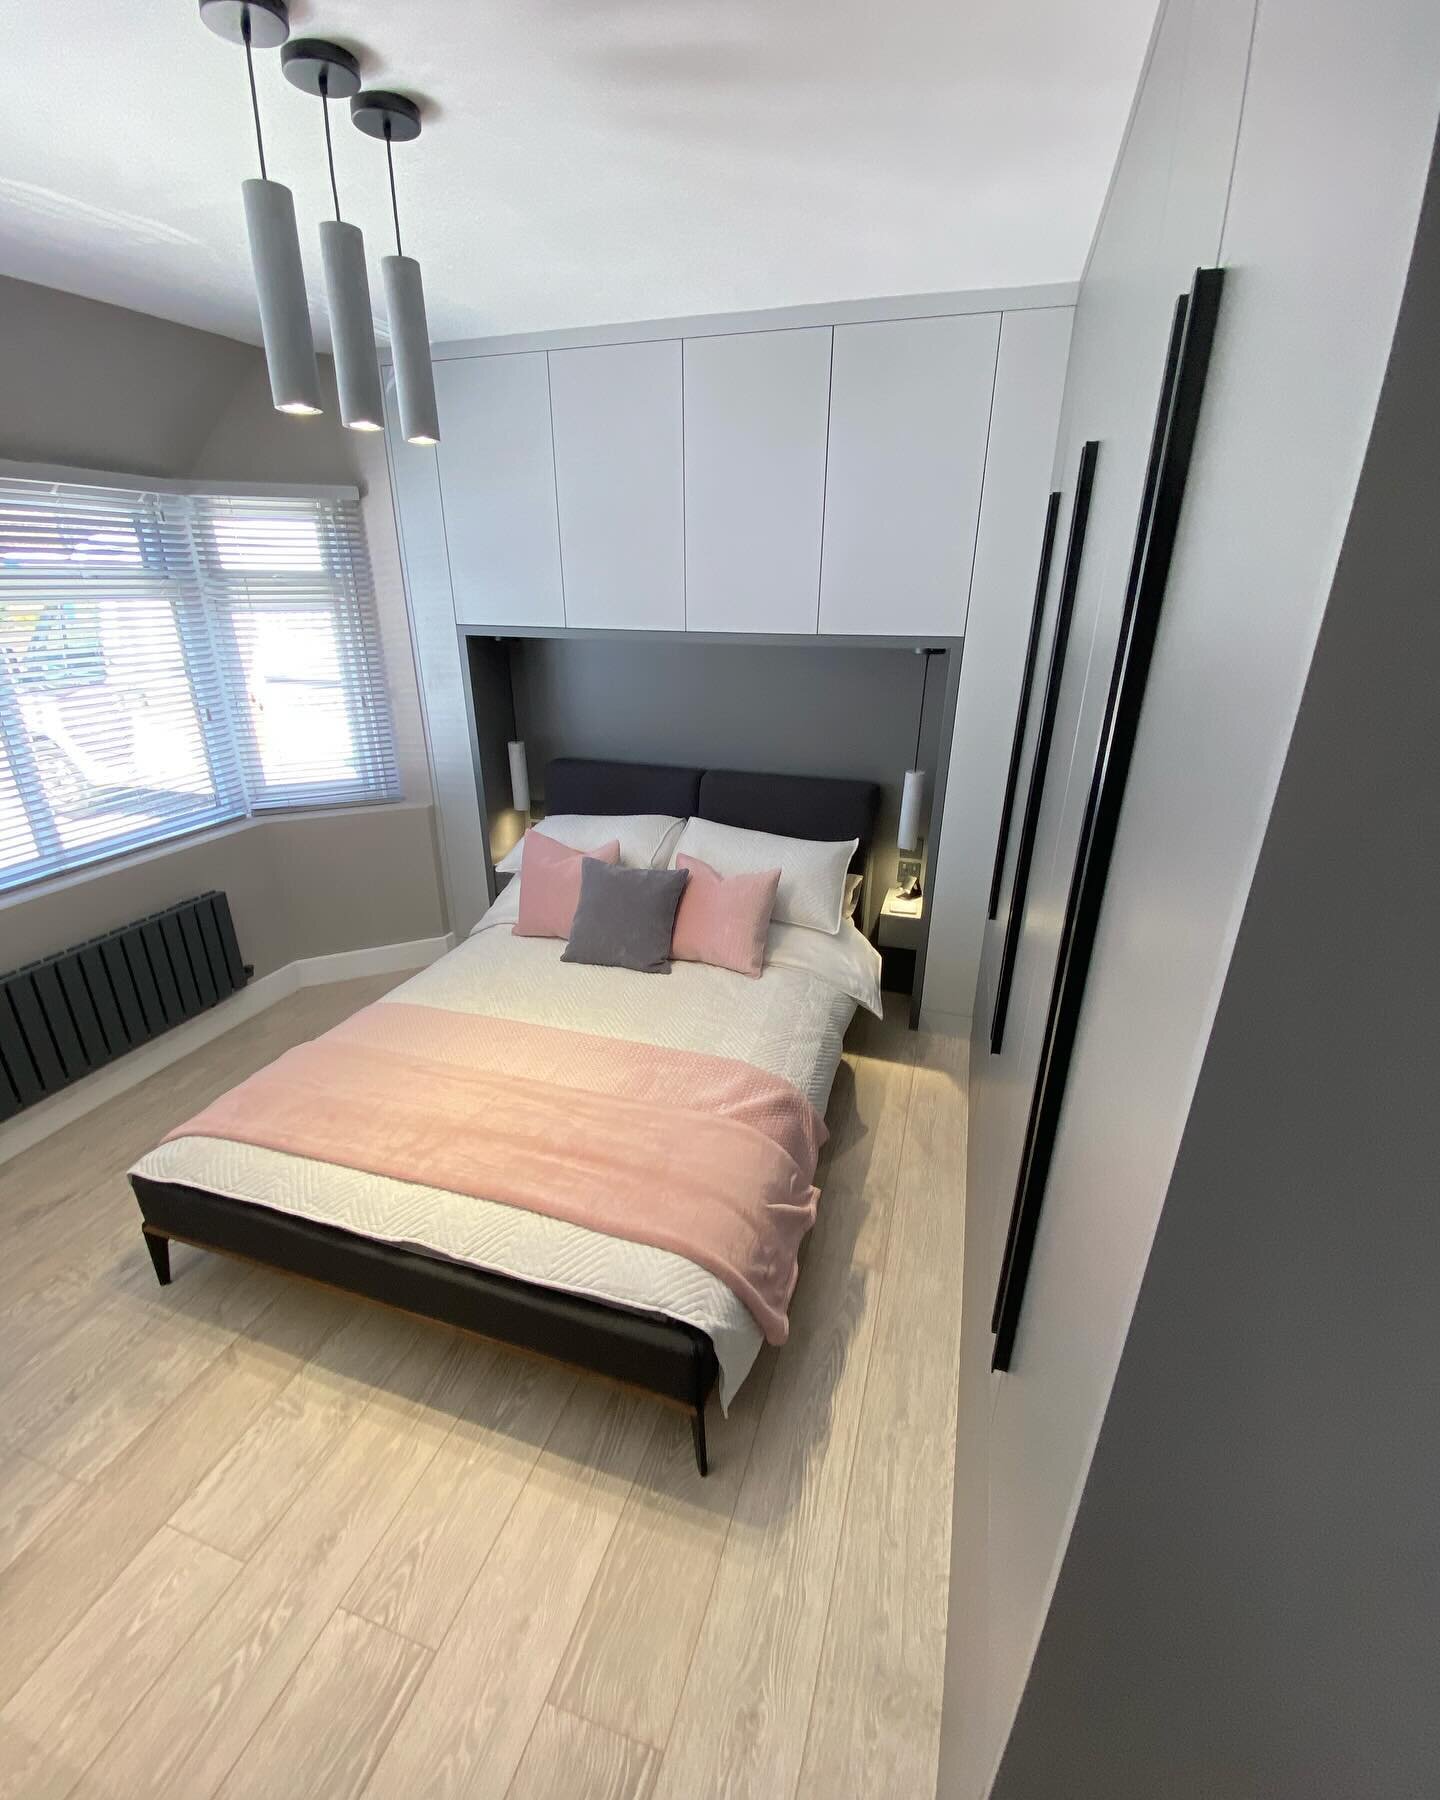 Lovely bedroom fitted in Shoreham two tone greys with a mixture of push to open and black long handles. 

#fittedbedrooms #wardrobe #bespokewardrobes #madetomeasure #handles #egger #greys #shoreham #storage 

@intrinsic_works  @eggeruk @articad.ltd @